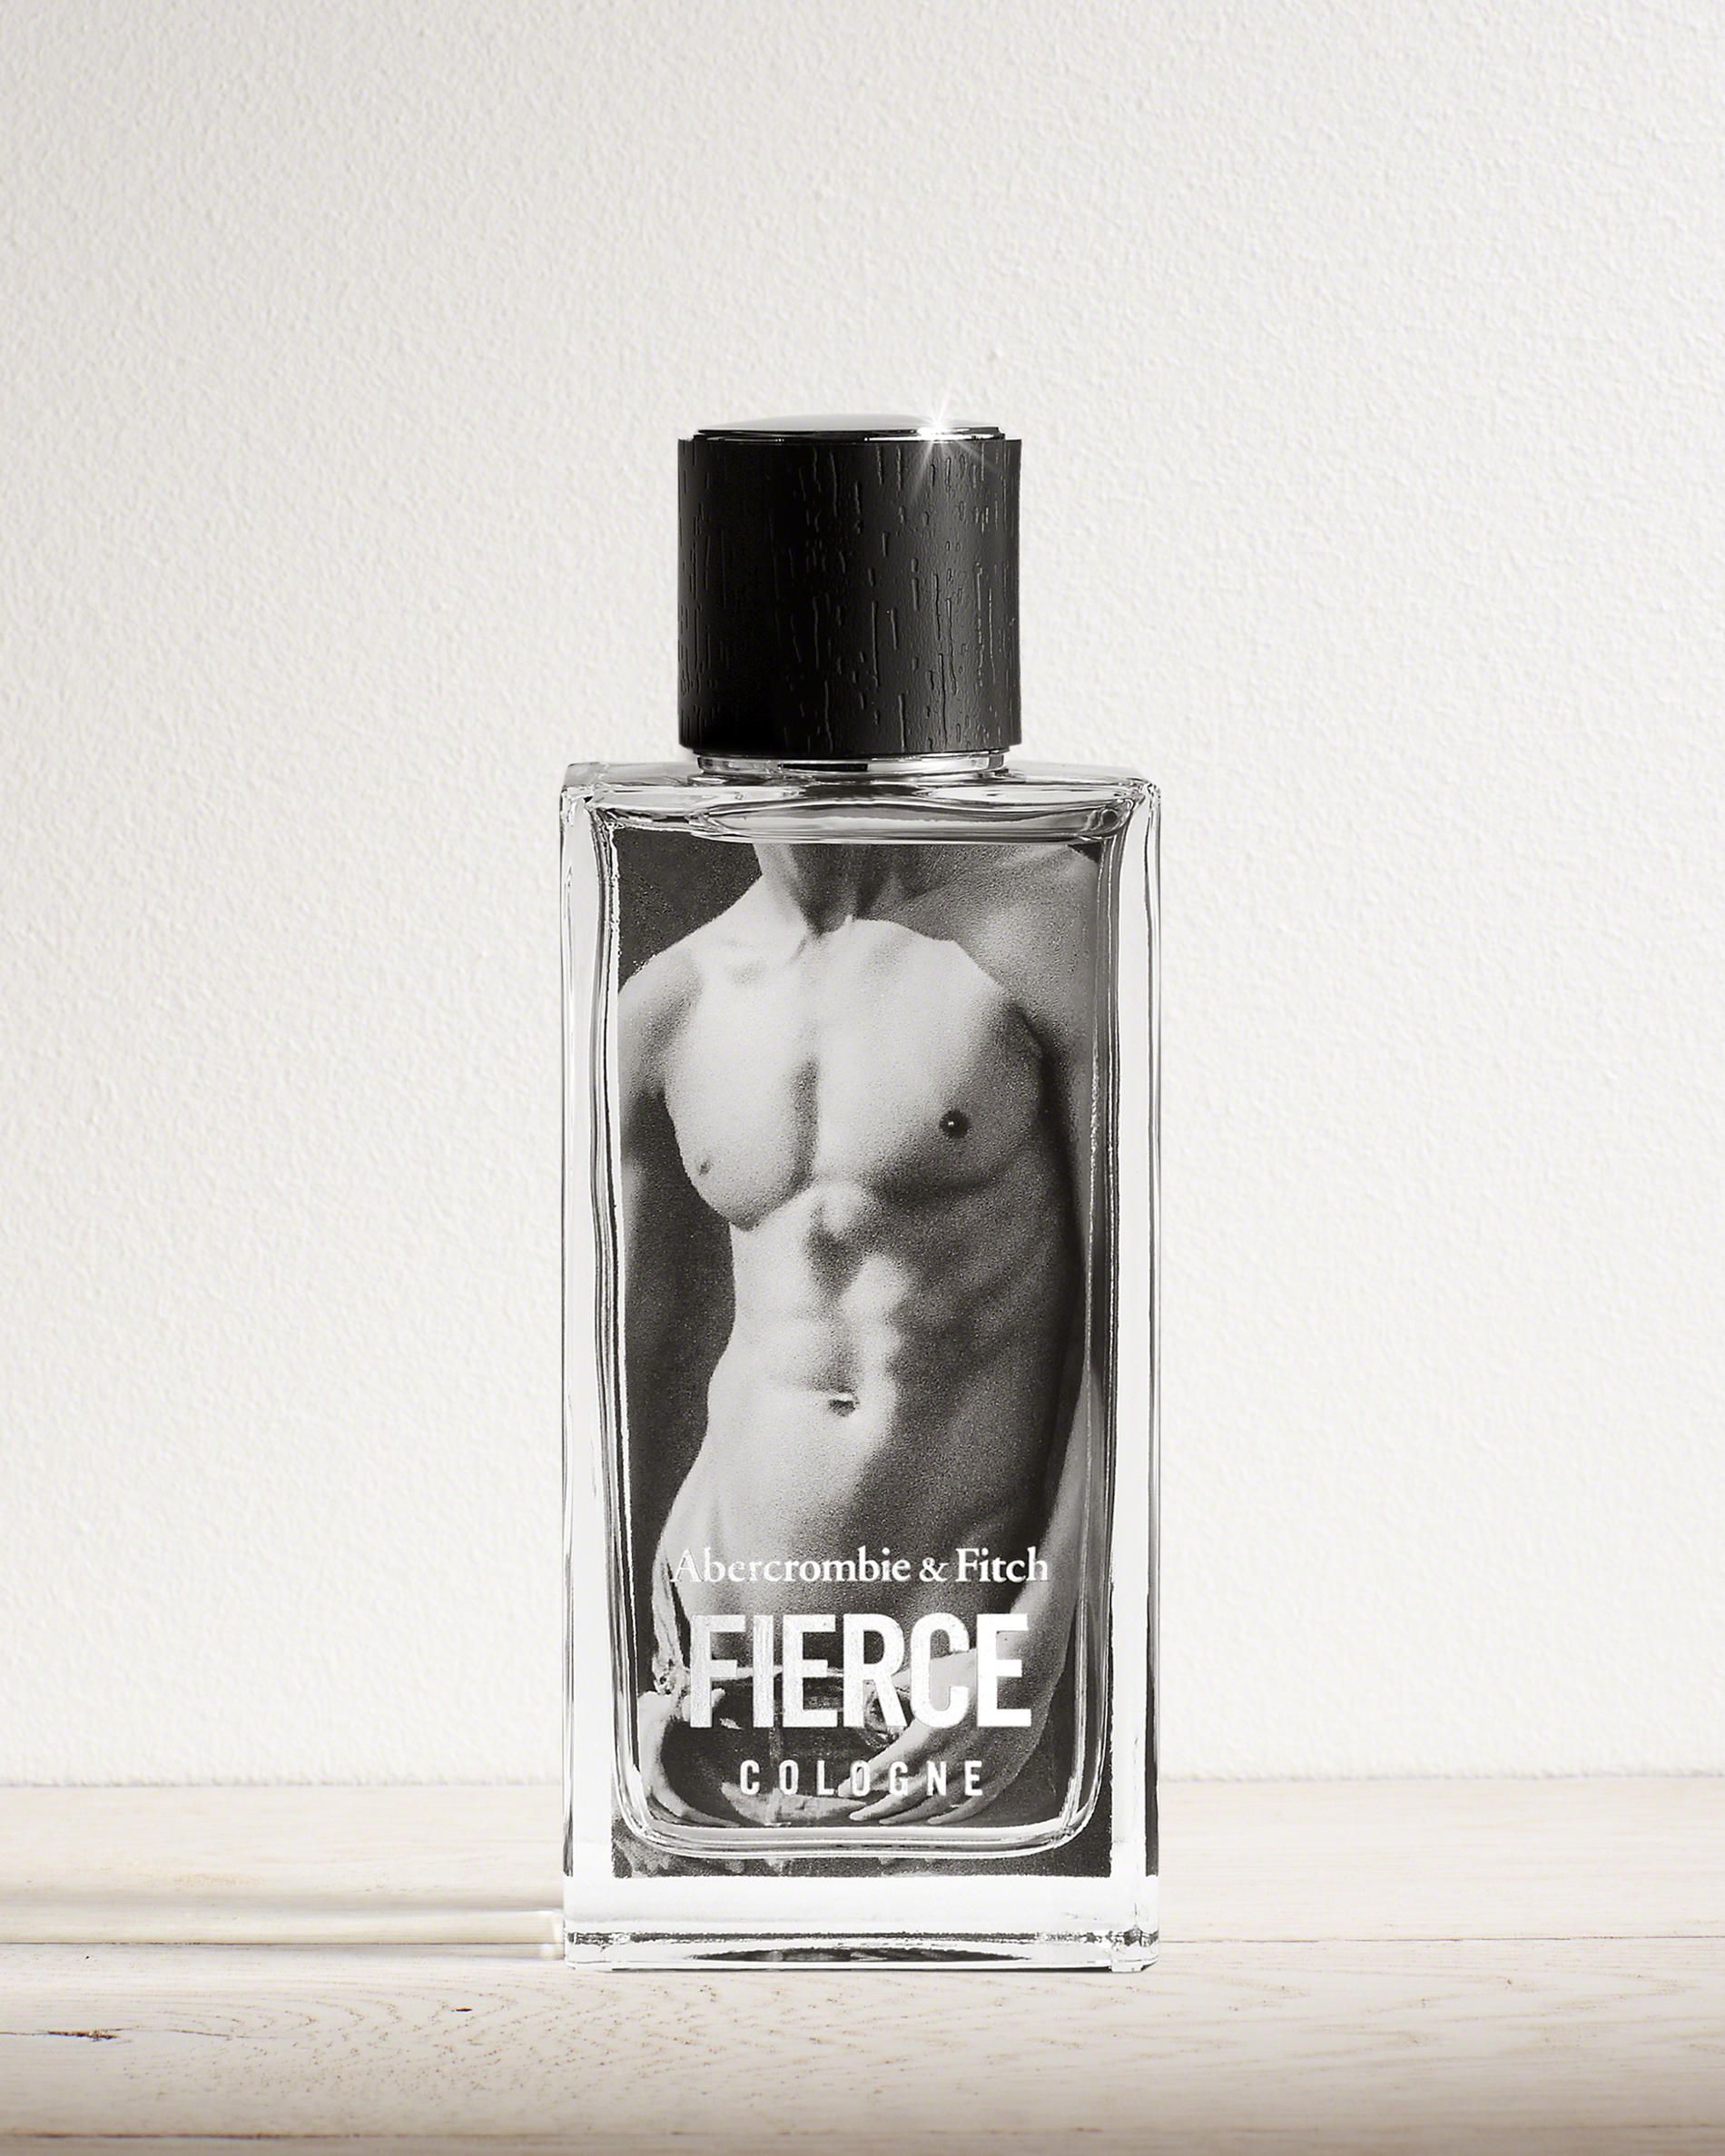 Abercrombie \u0026 Fitch Stores Won't Smell 